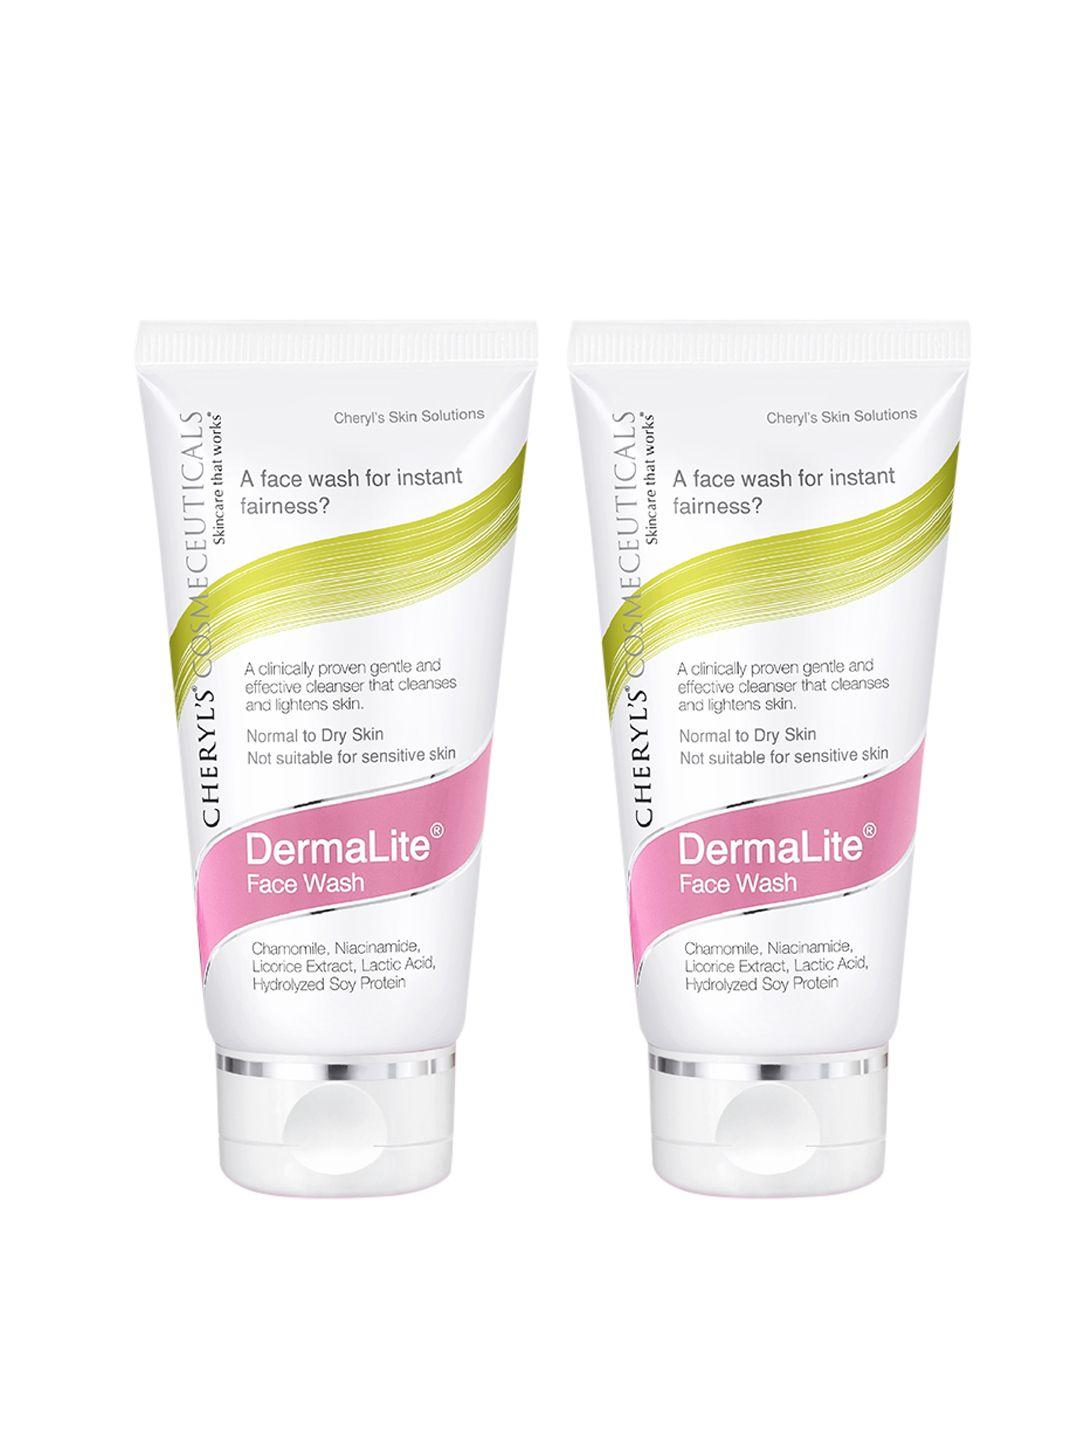 cheryls cosmeceuticals set of 2 dermabright face wash for normal to dry skin - 50g each